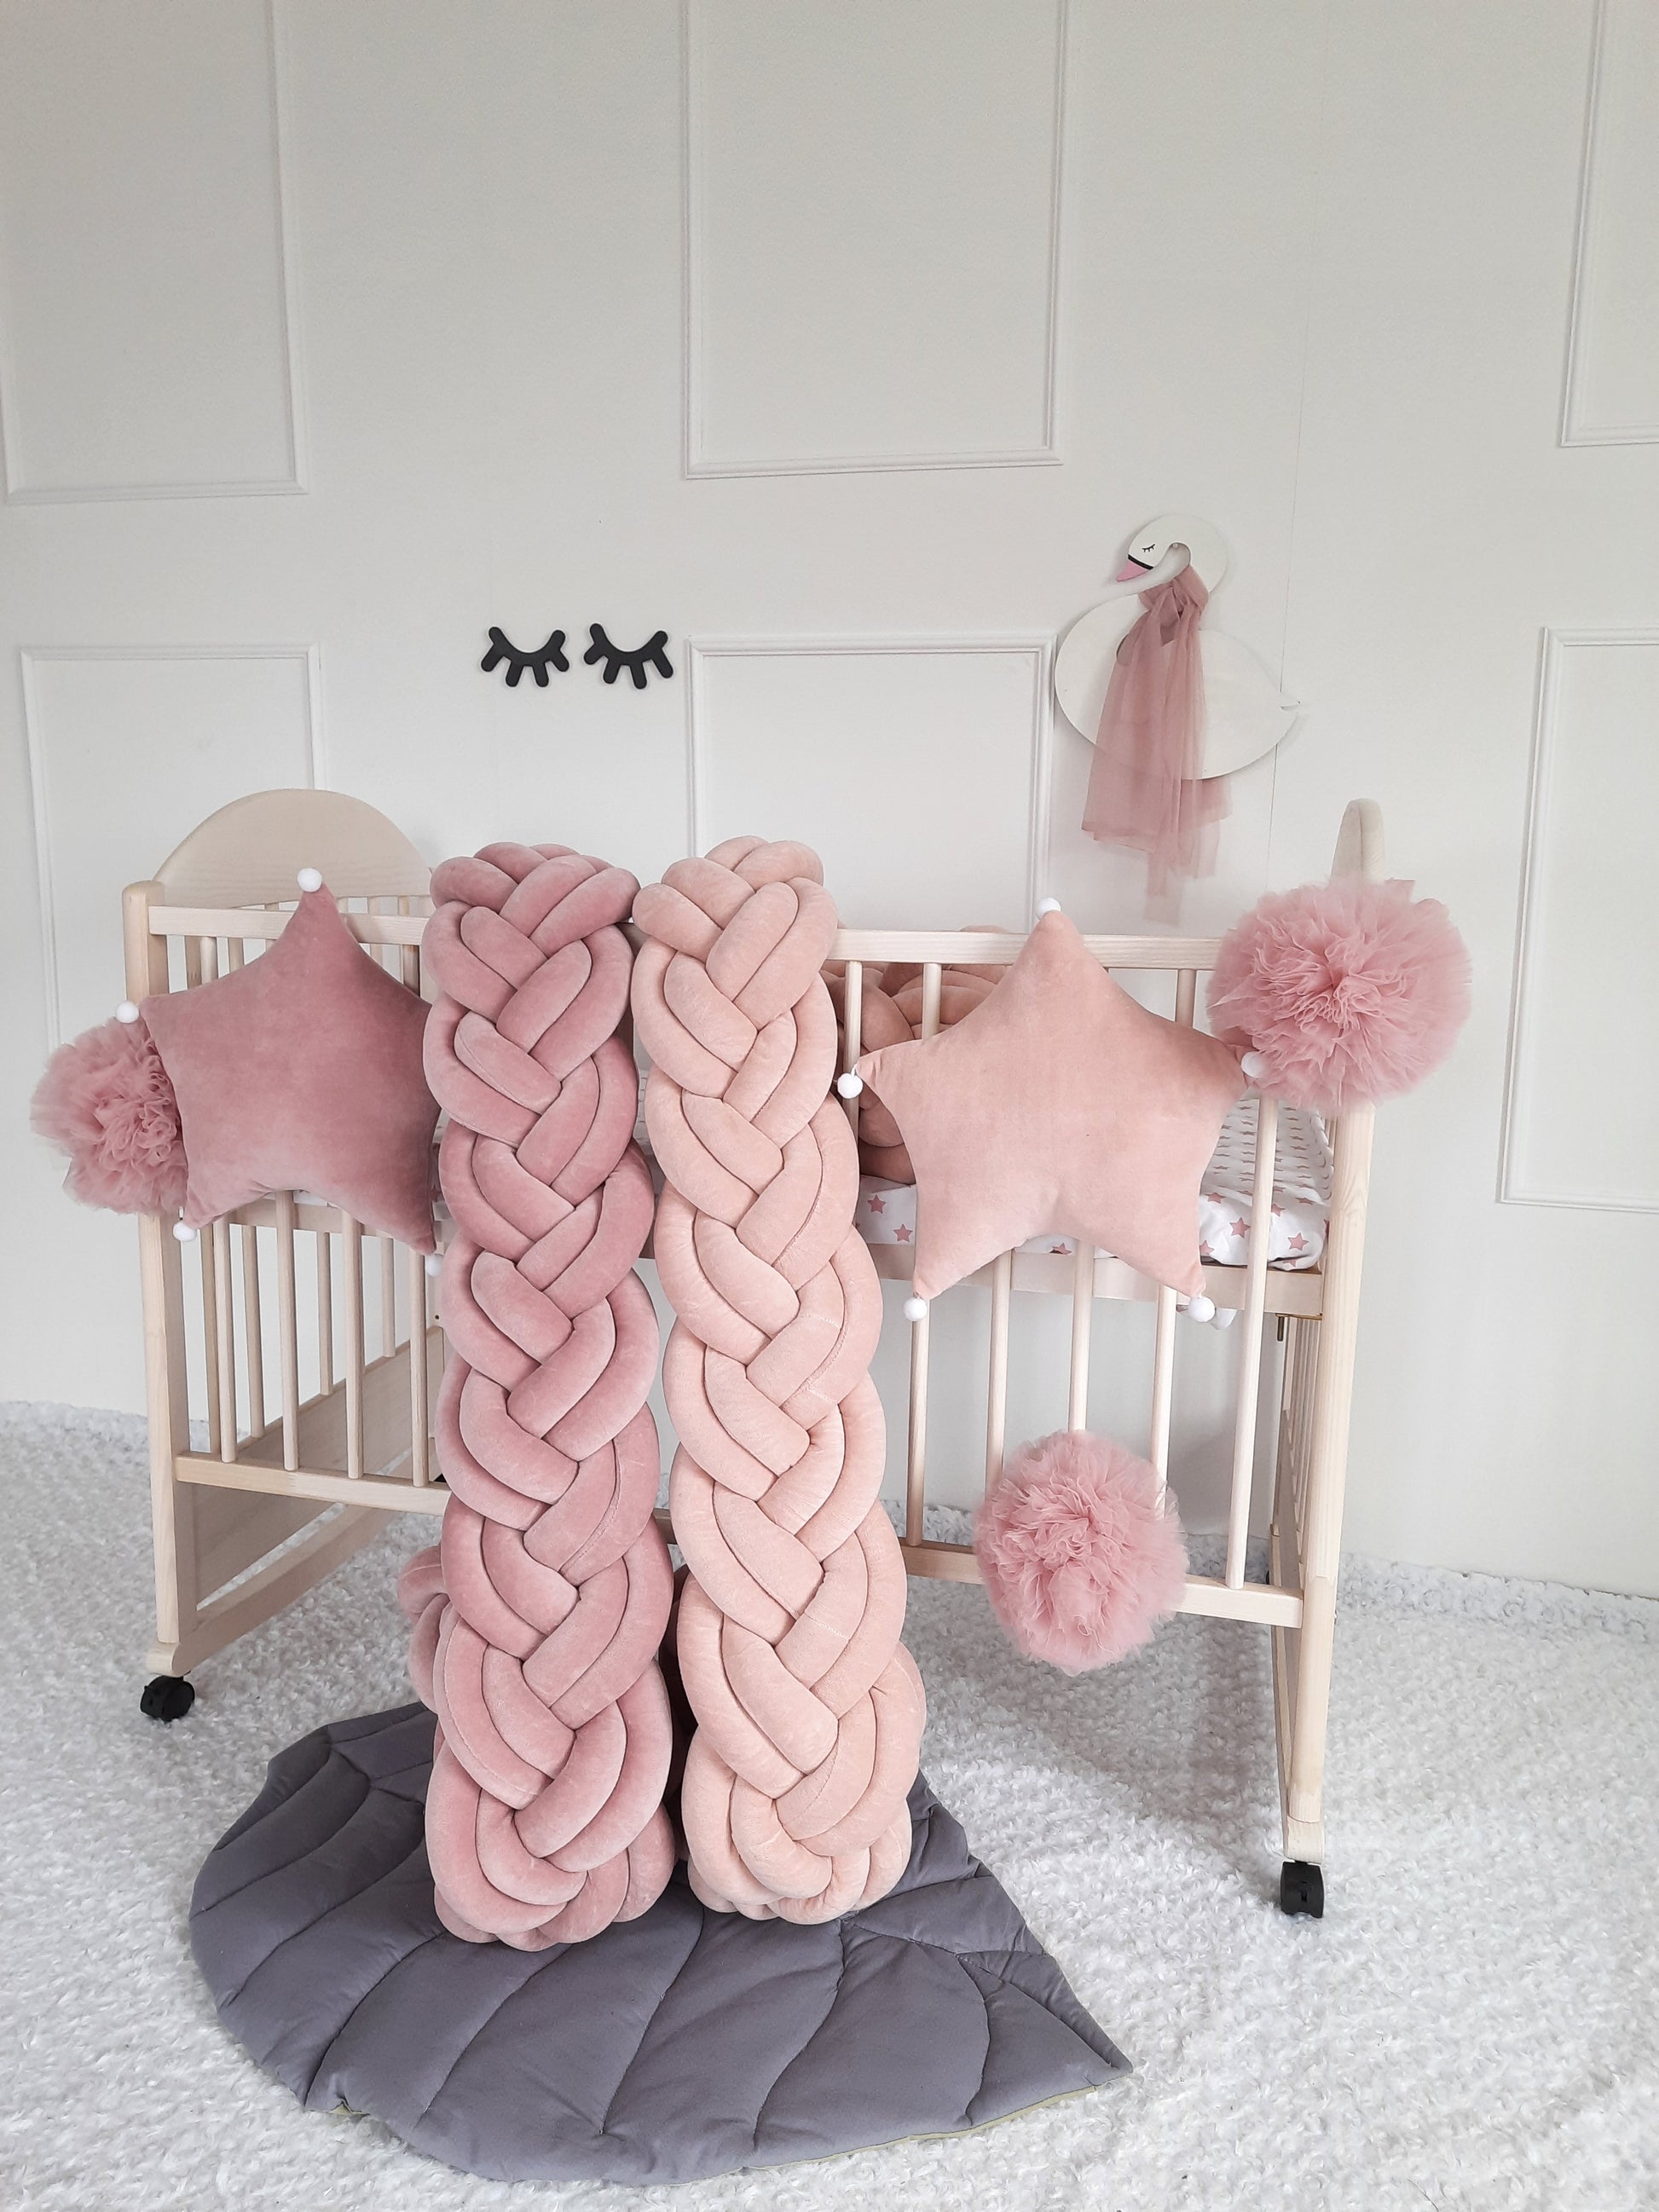 Rose and Blush Double braided crib bumper with rose and blush star pillows and pom poms on the crib. AllbrightKids goods for nursery